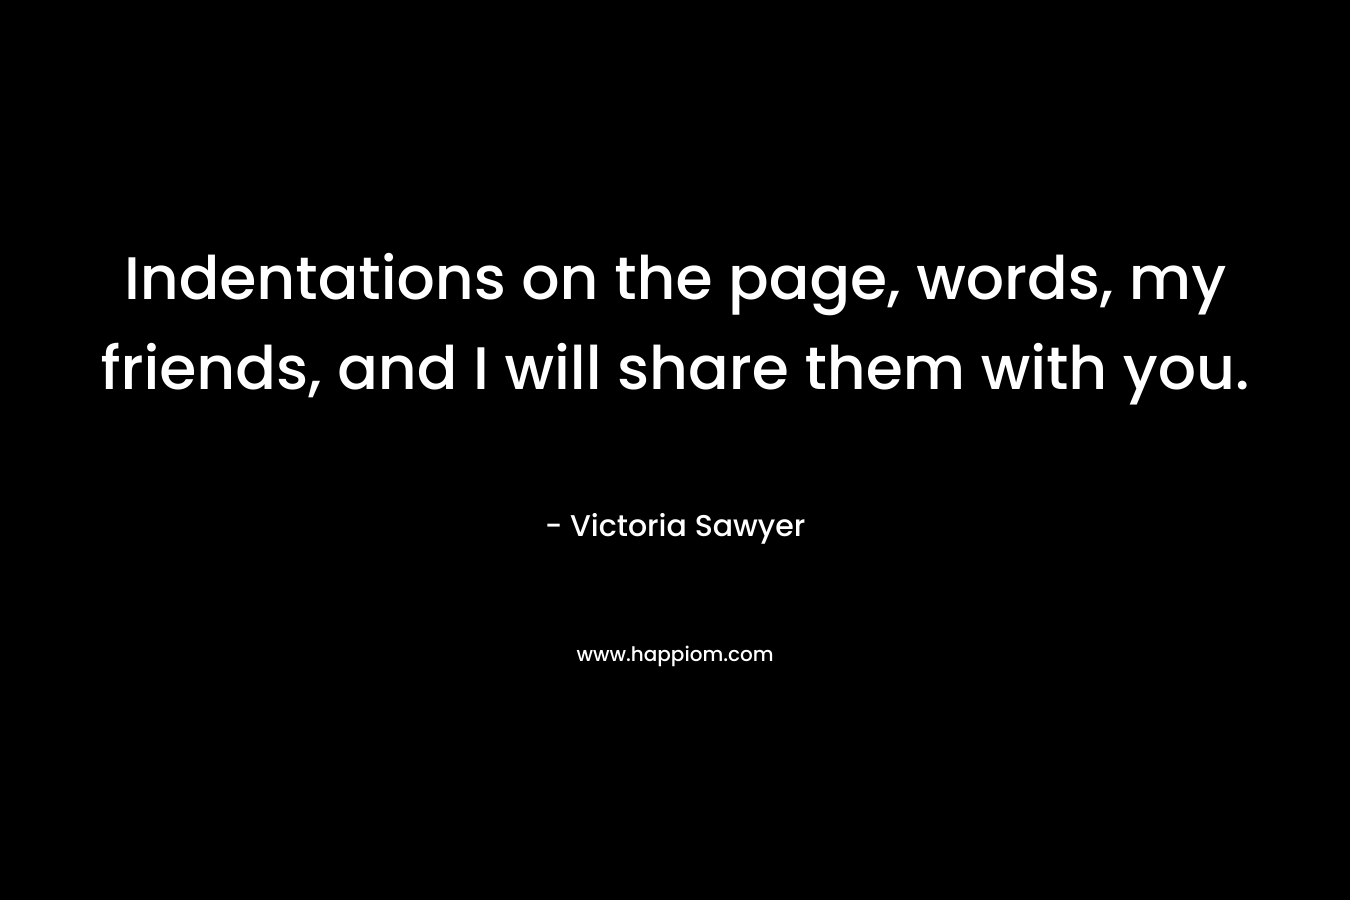 Indentations on the page, words, my friends, and I will share them with you. – Victoria Sawyer